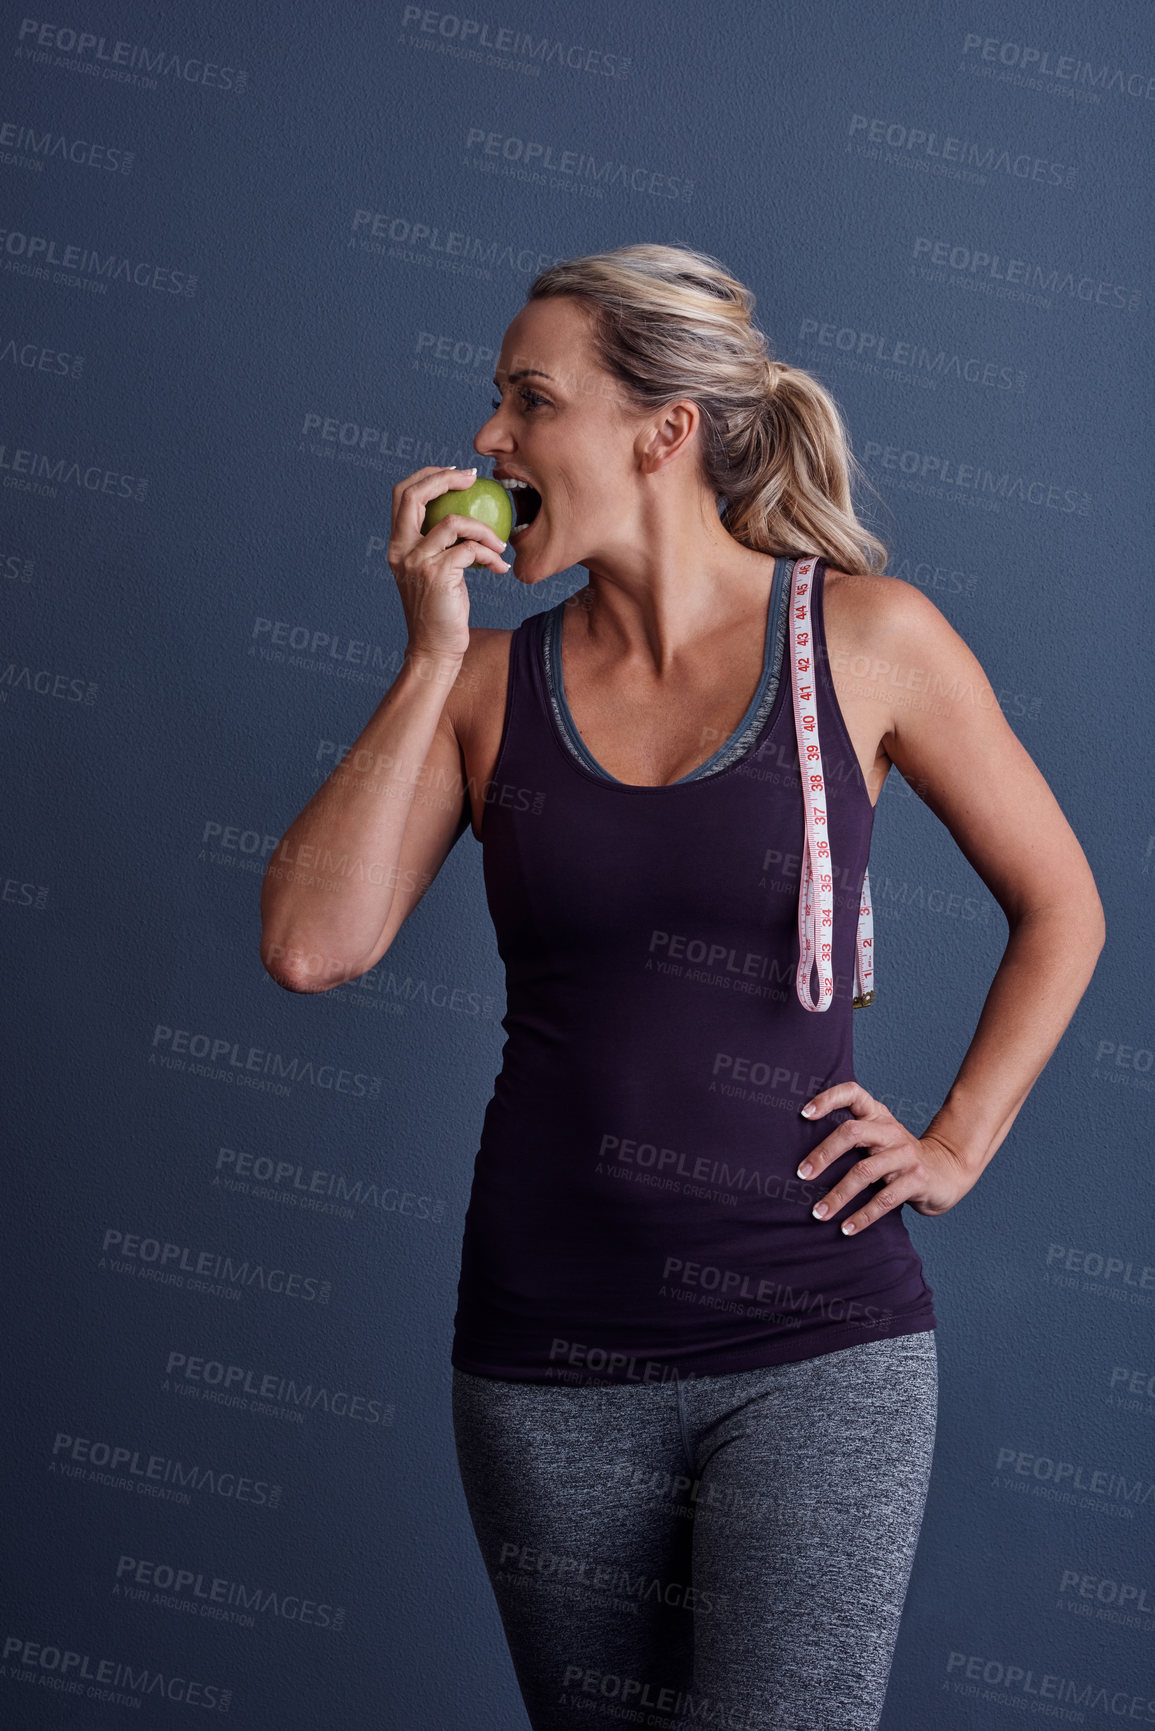 Buy stock photo Studio shot of an attractive mature woman biting into an apple against a blue background